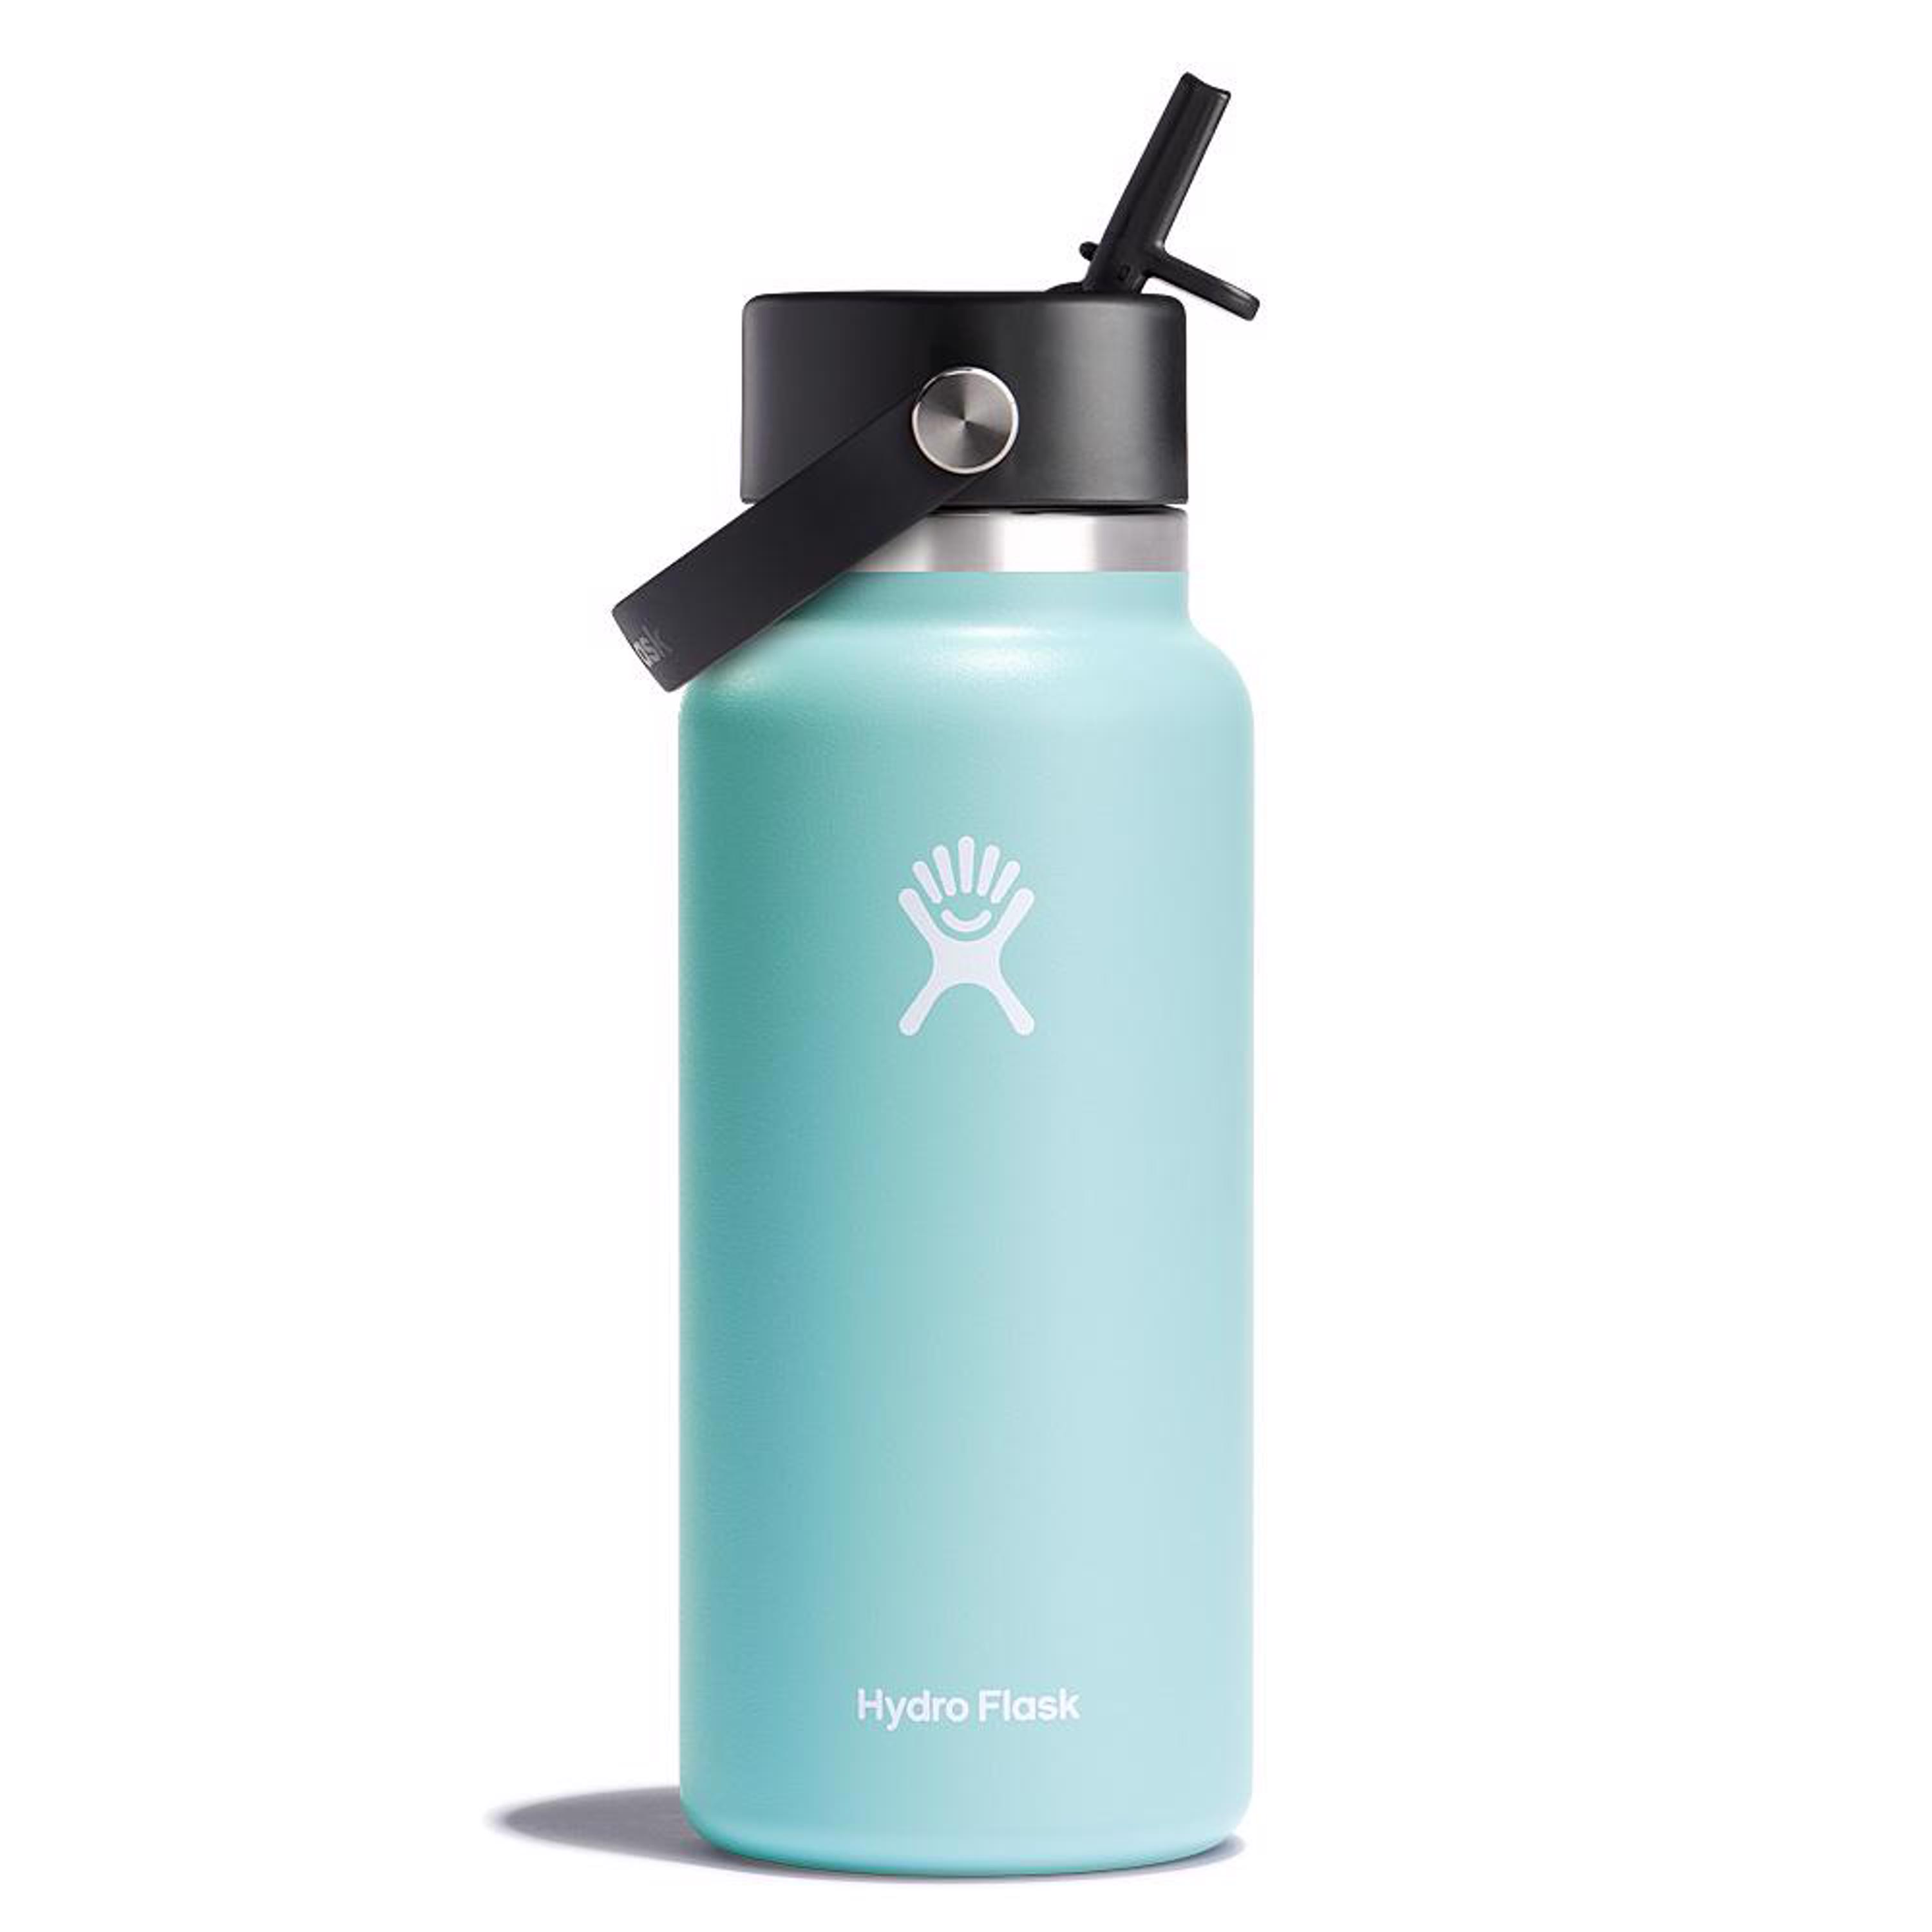 Hydro Flask 32 oz Wide Mouth PNW Collection